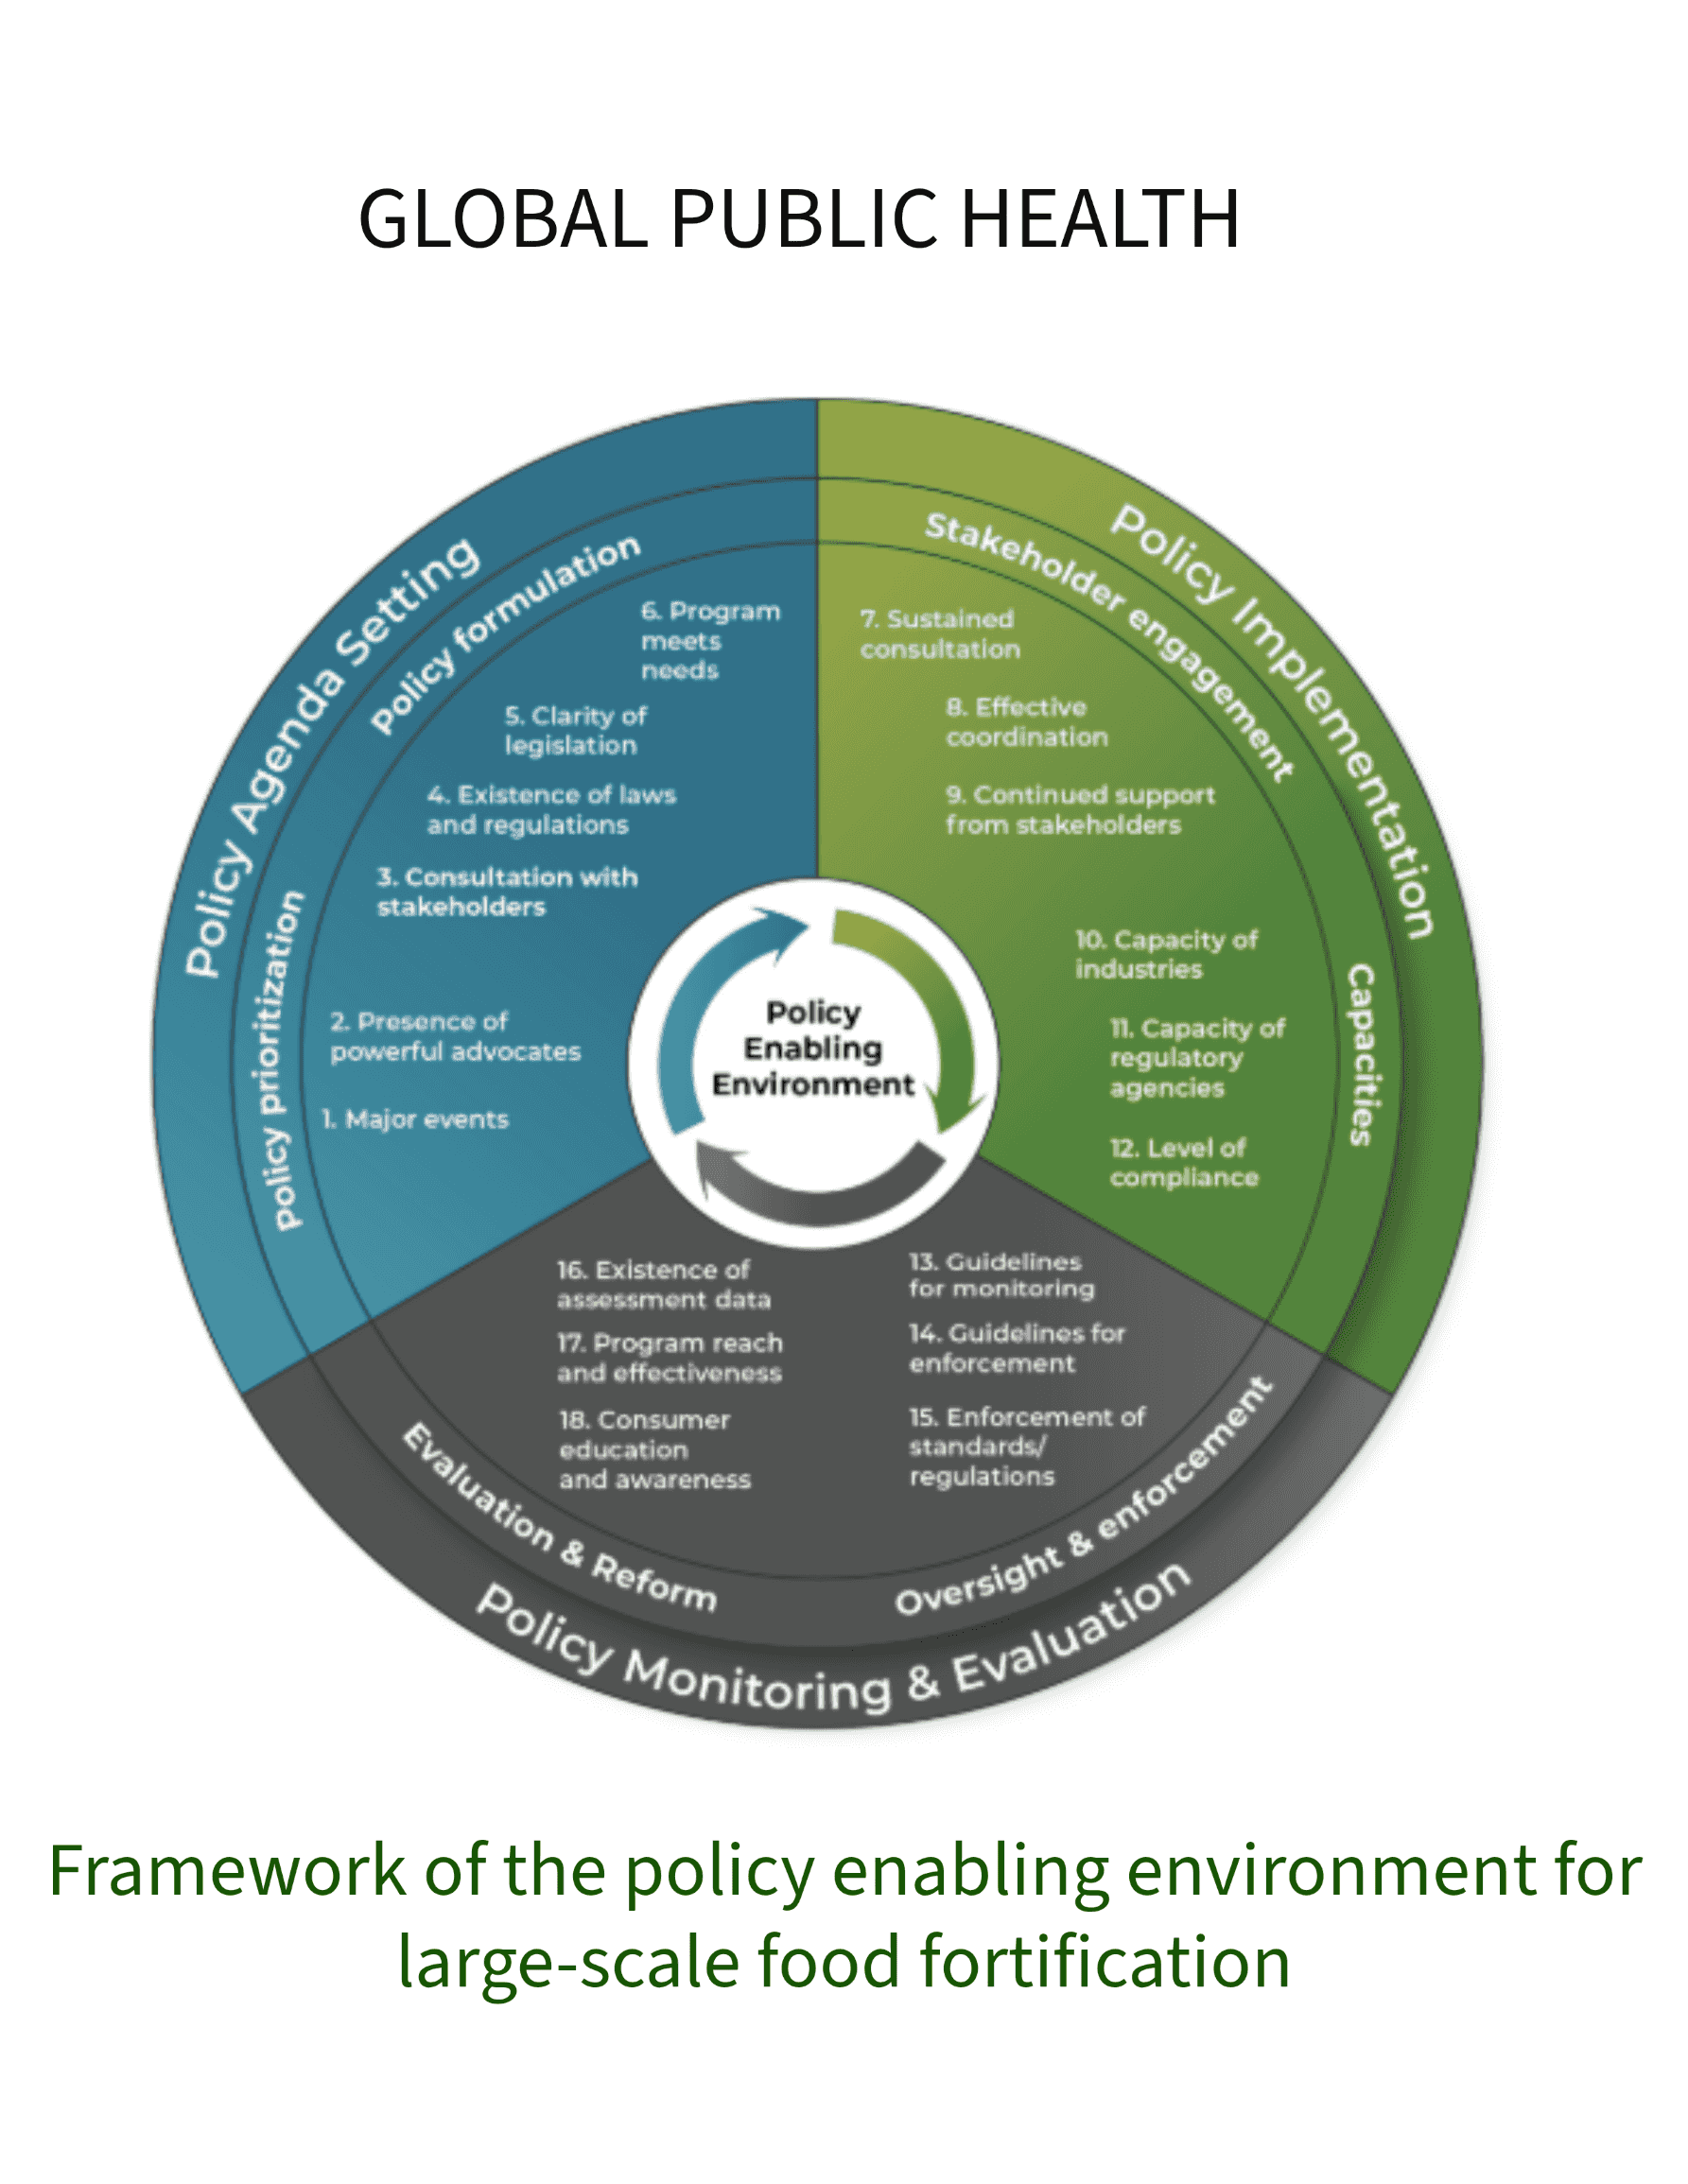 Assessment of the policy enabling environment for large-scale food fortification: A novel framework with an application to Kenya